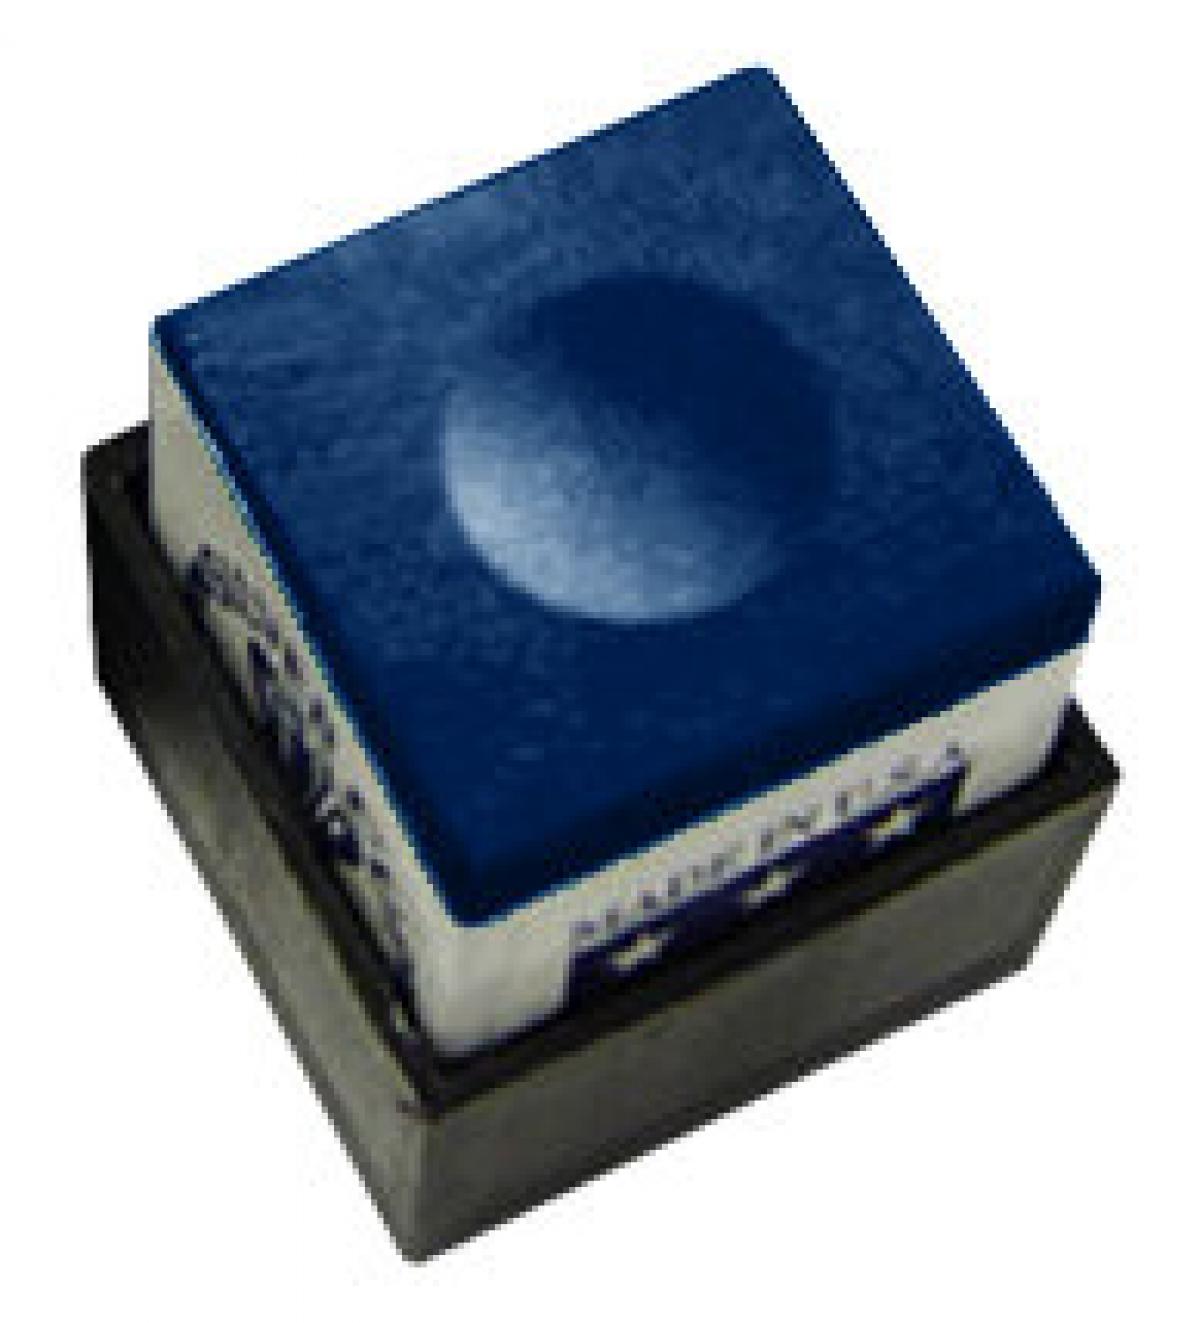 Silver Cup Chalk (navy blue, single cube)